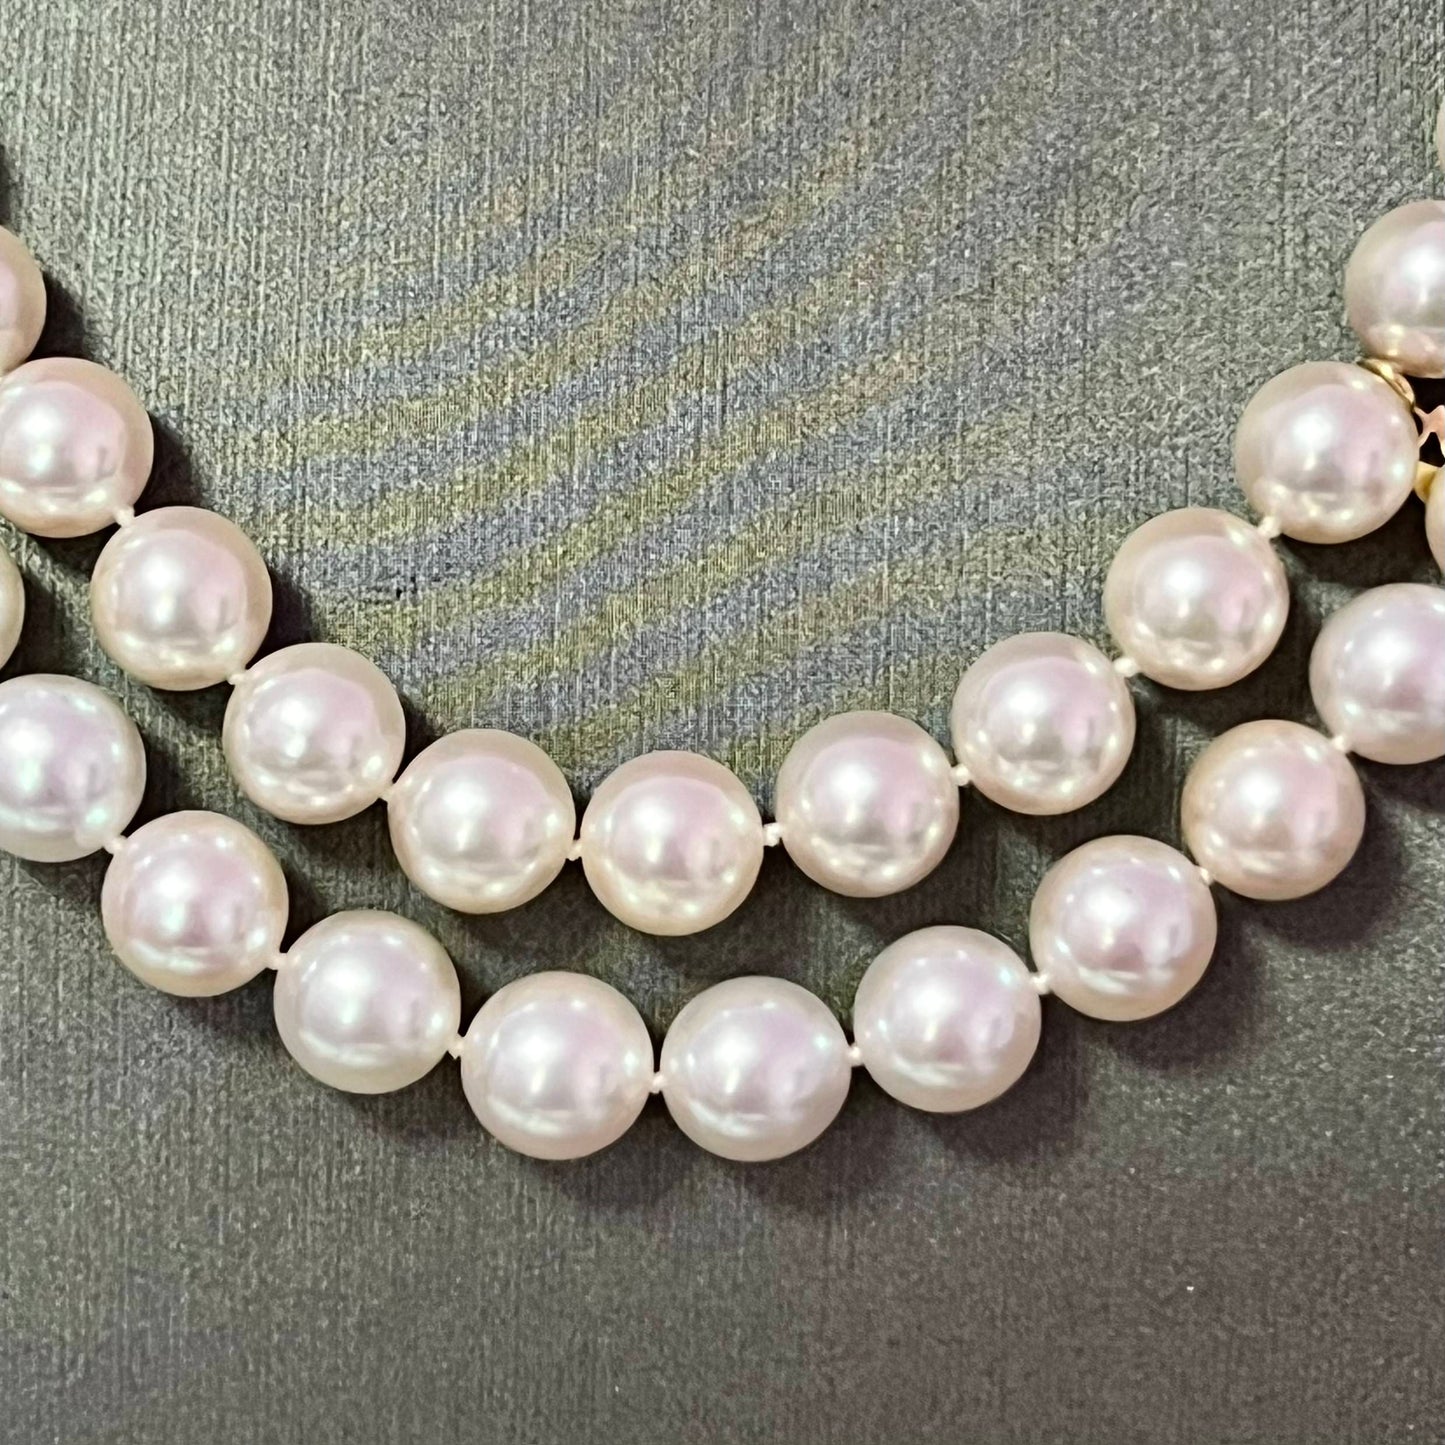 Mikimoto Estate Akoya Pearl Necklace 34" 18k Gold 9.5 mm Certified $126,000 M126000